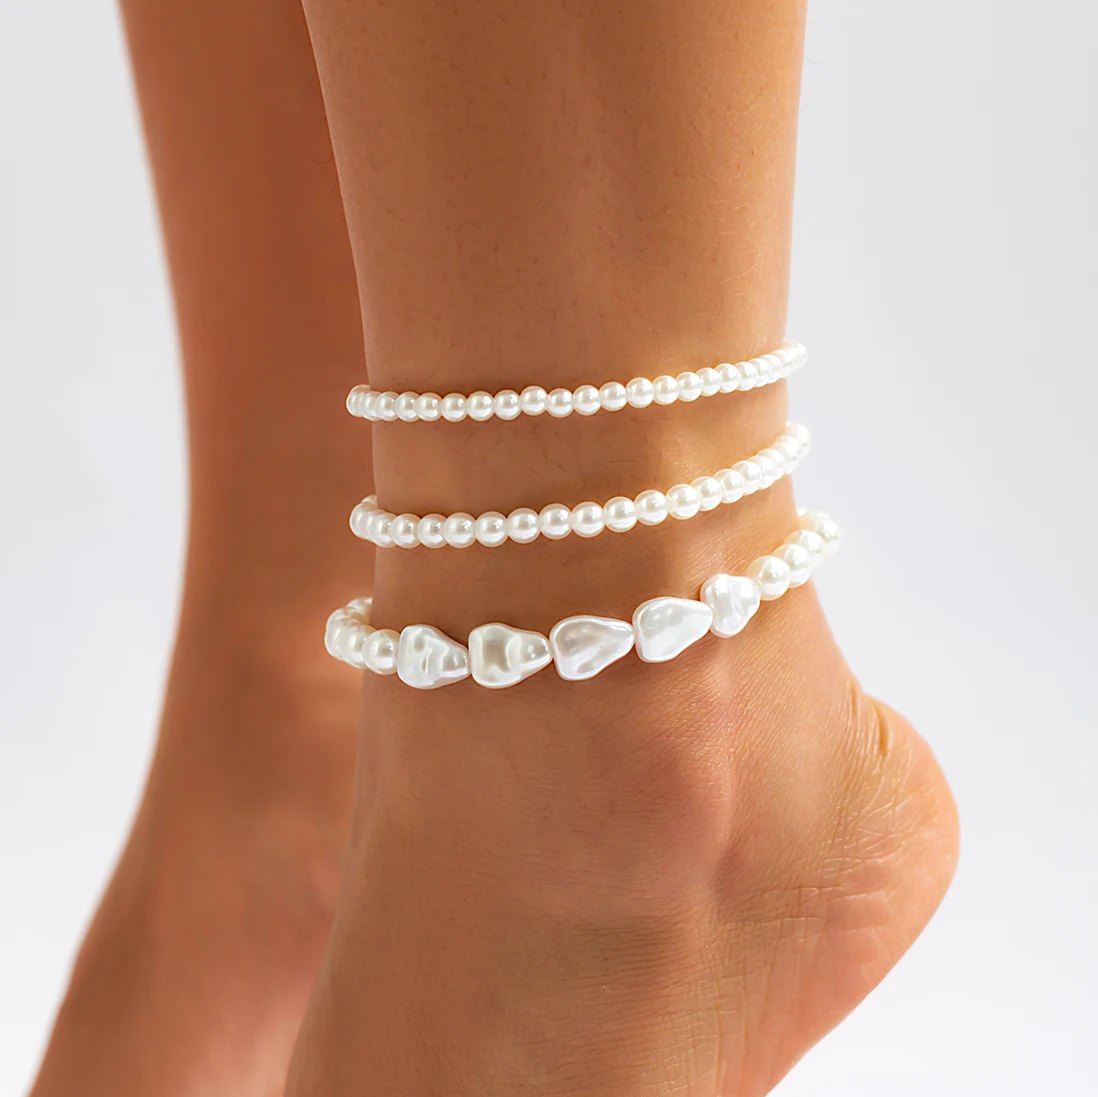 

Ingemark Boho Multilayer Baroque Pearl Chain Anklet for Women Lady High Heel Ankle Bracelet Barefoot Sandals Summer Foot Jewelry